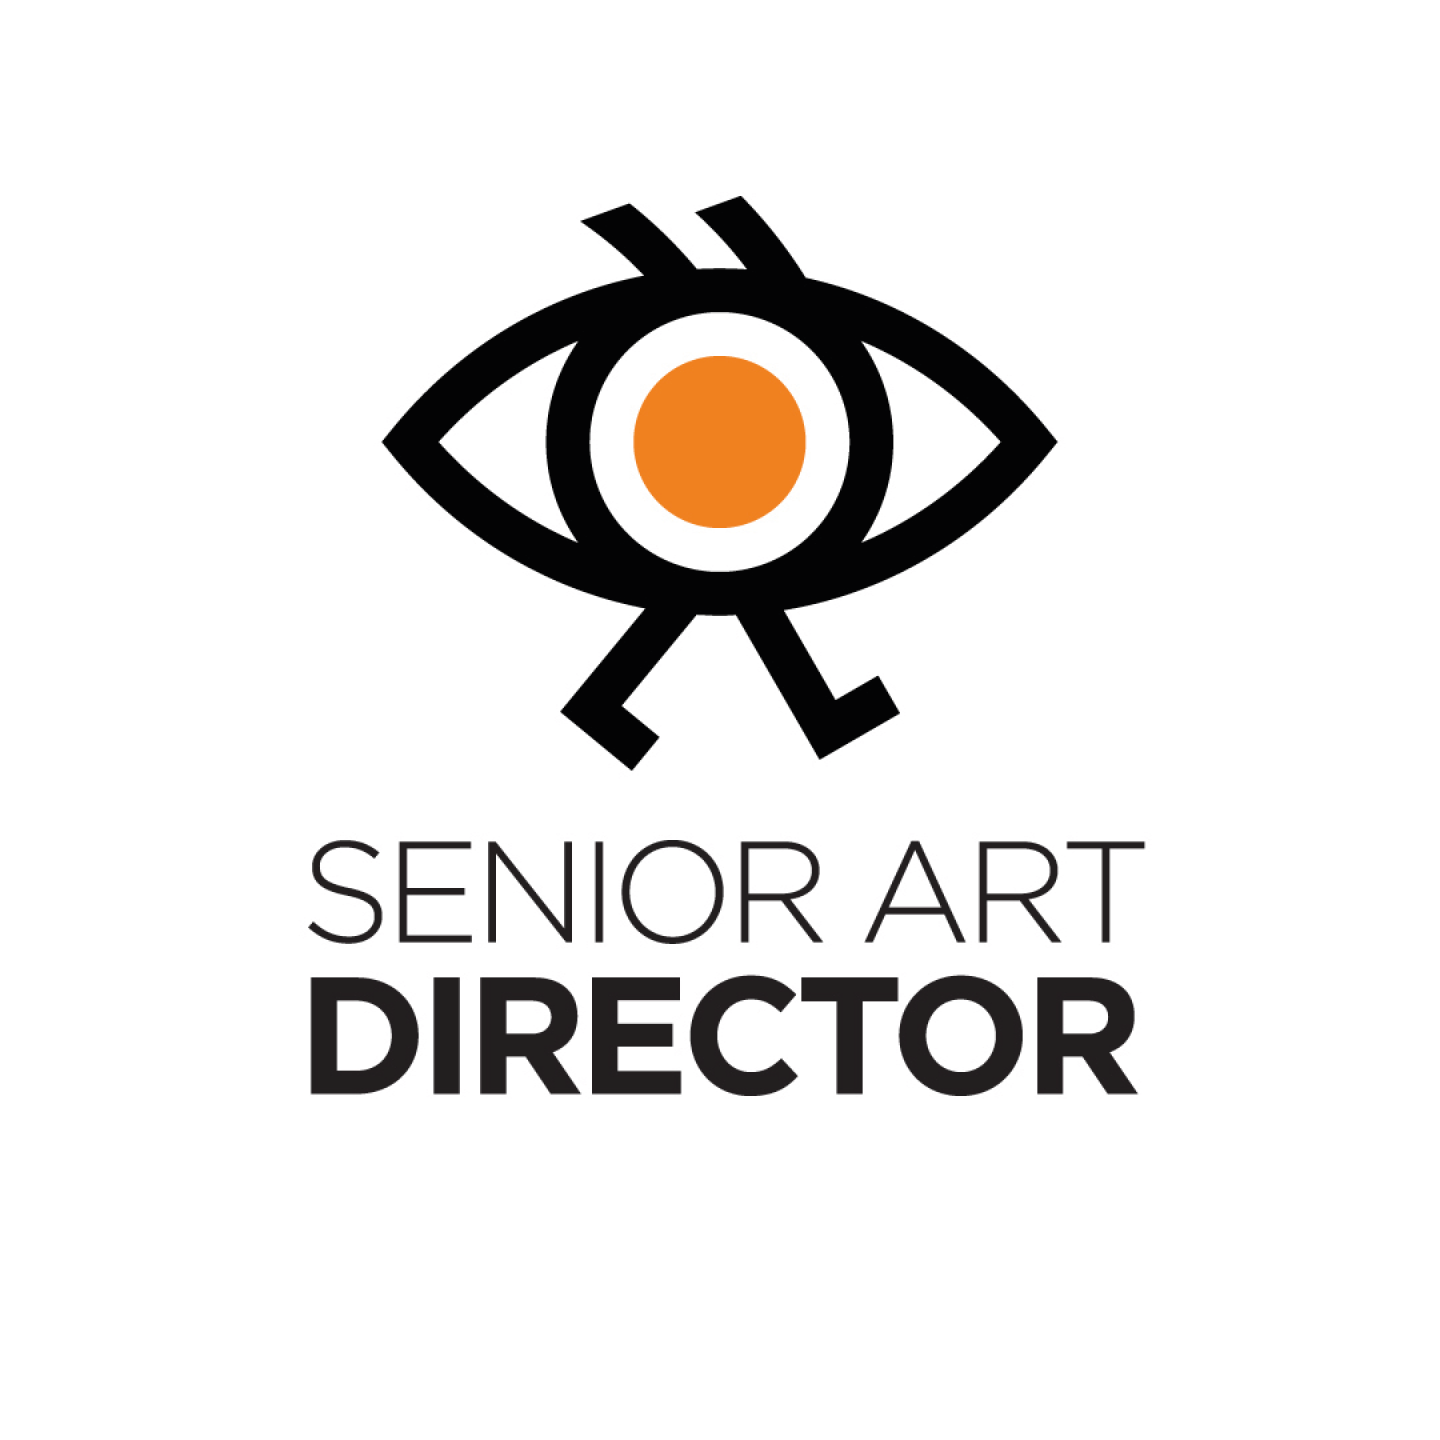 We are looking for NEW SENIOR ART DIRECTOR